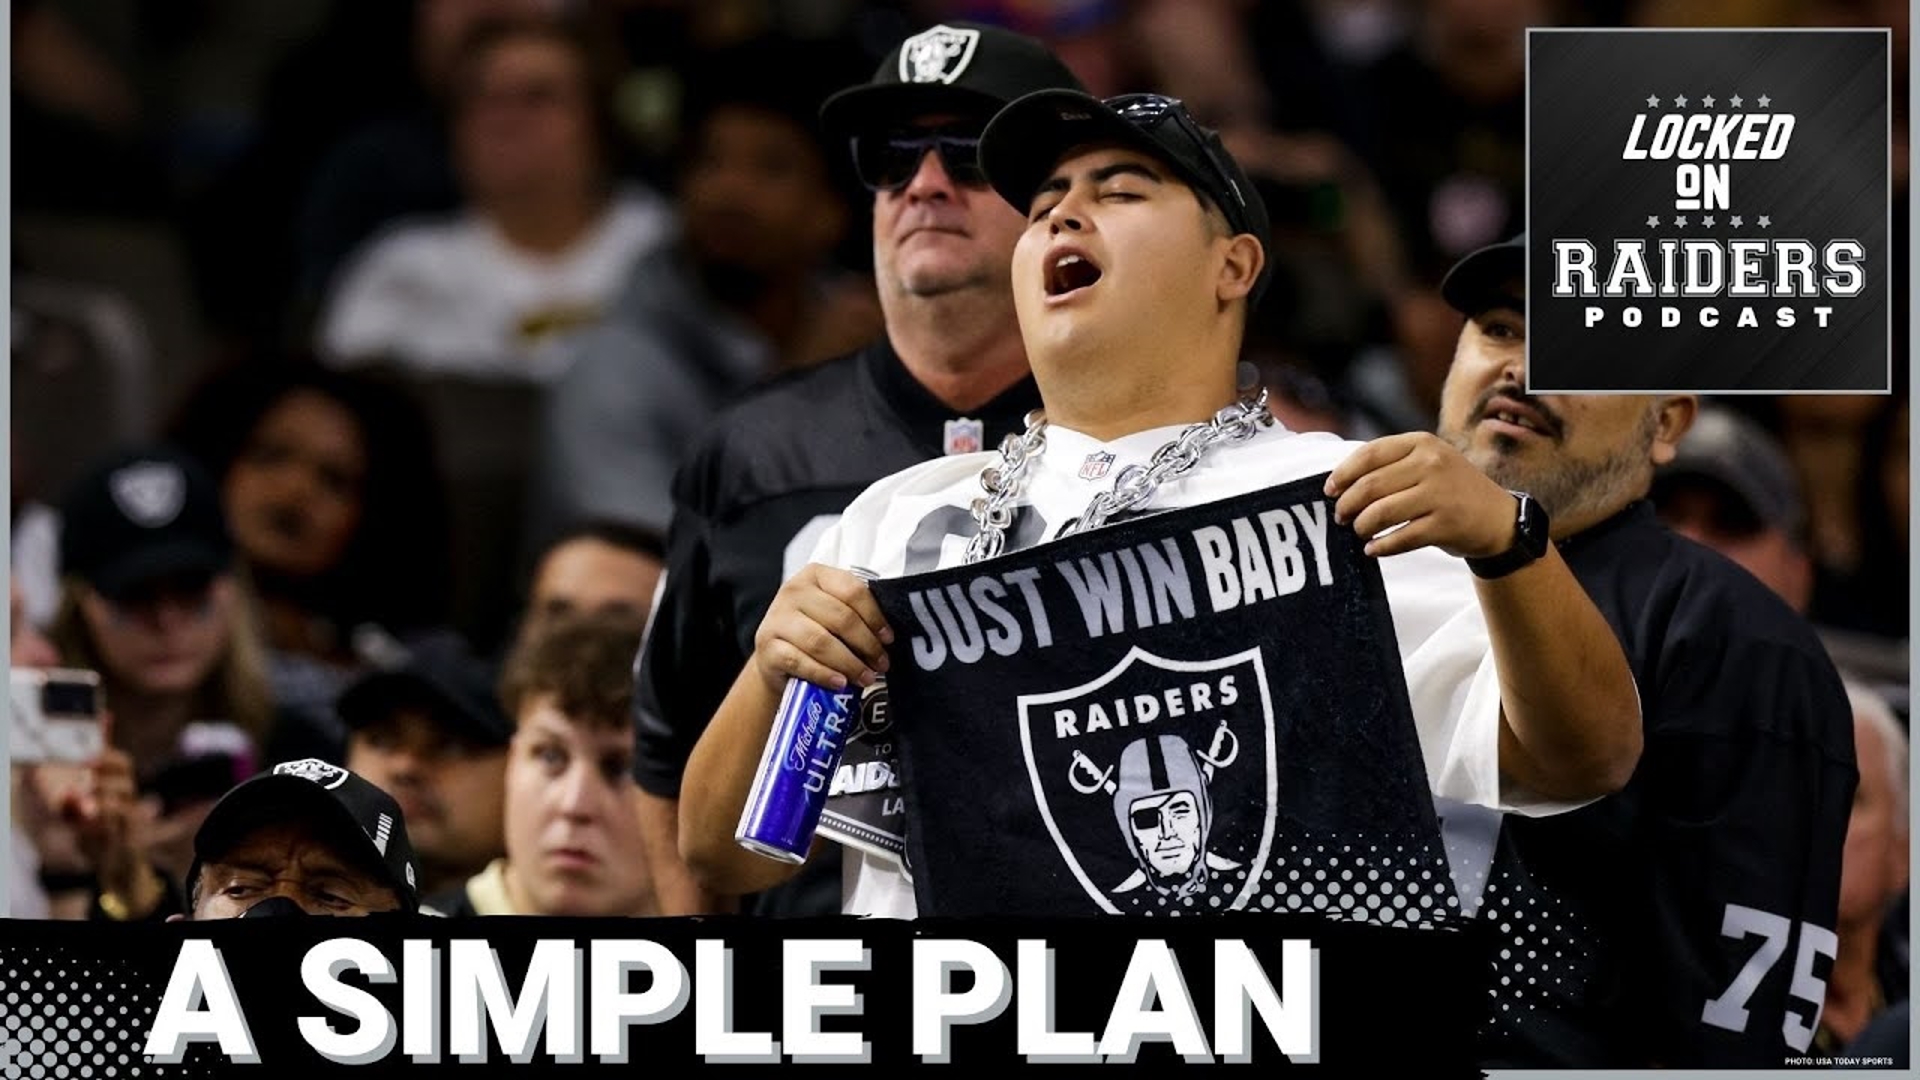 Did the Las Vegas Raiders have a plan during the draft or was it a big swing and miss?